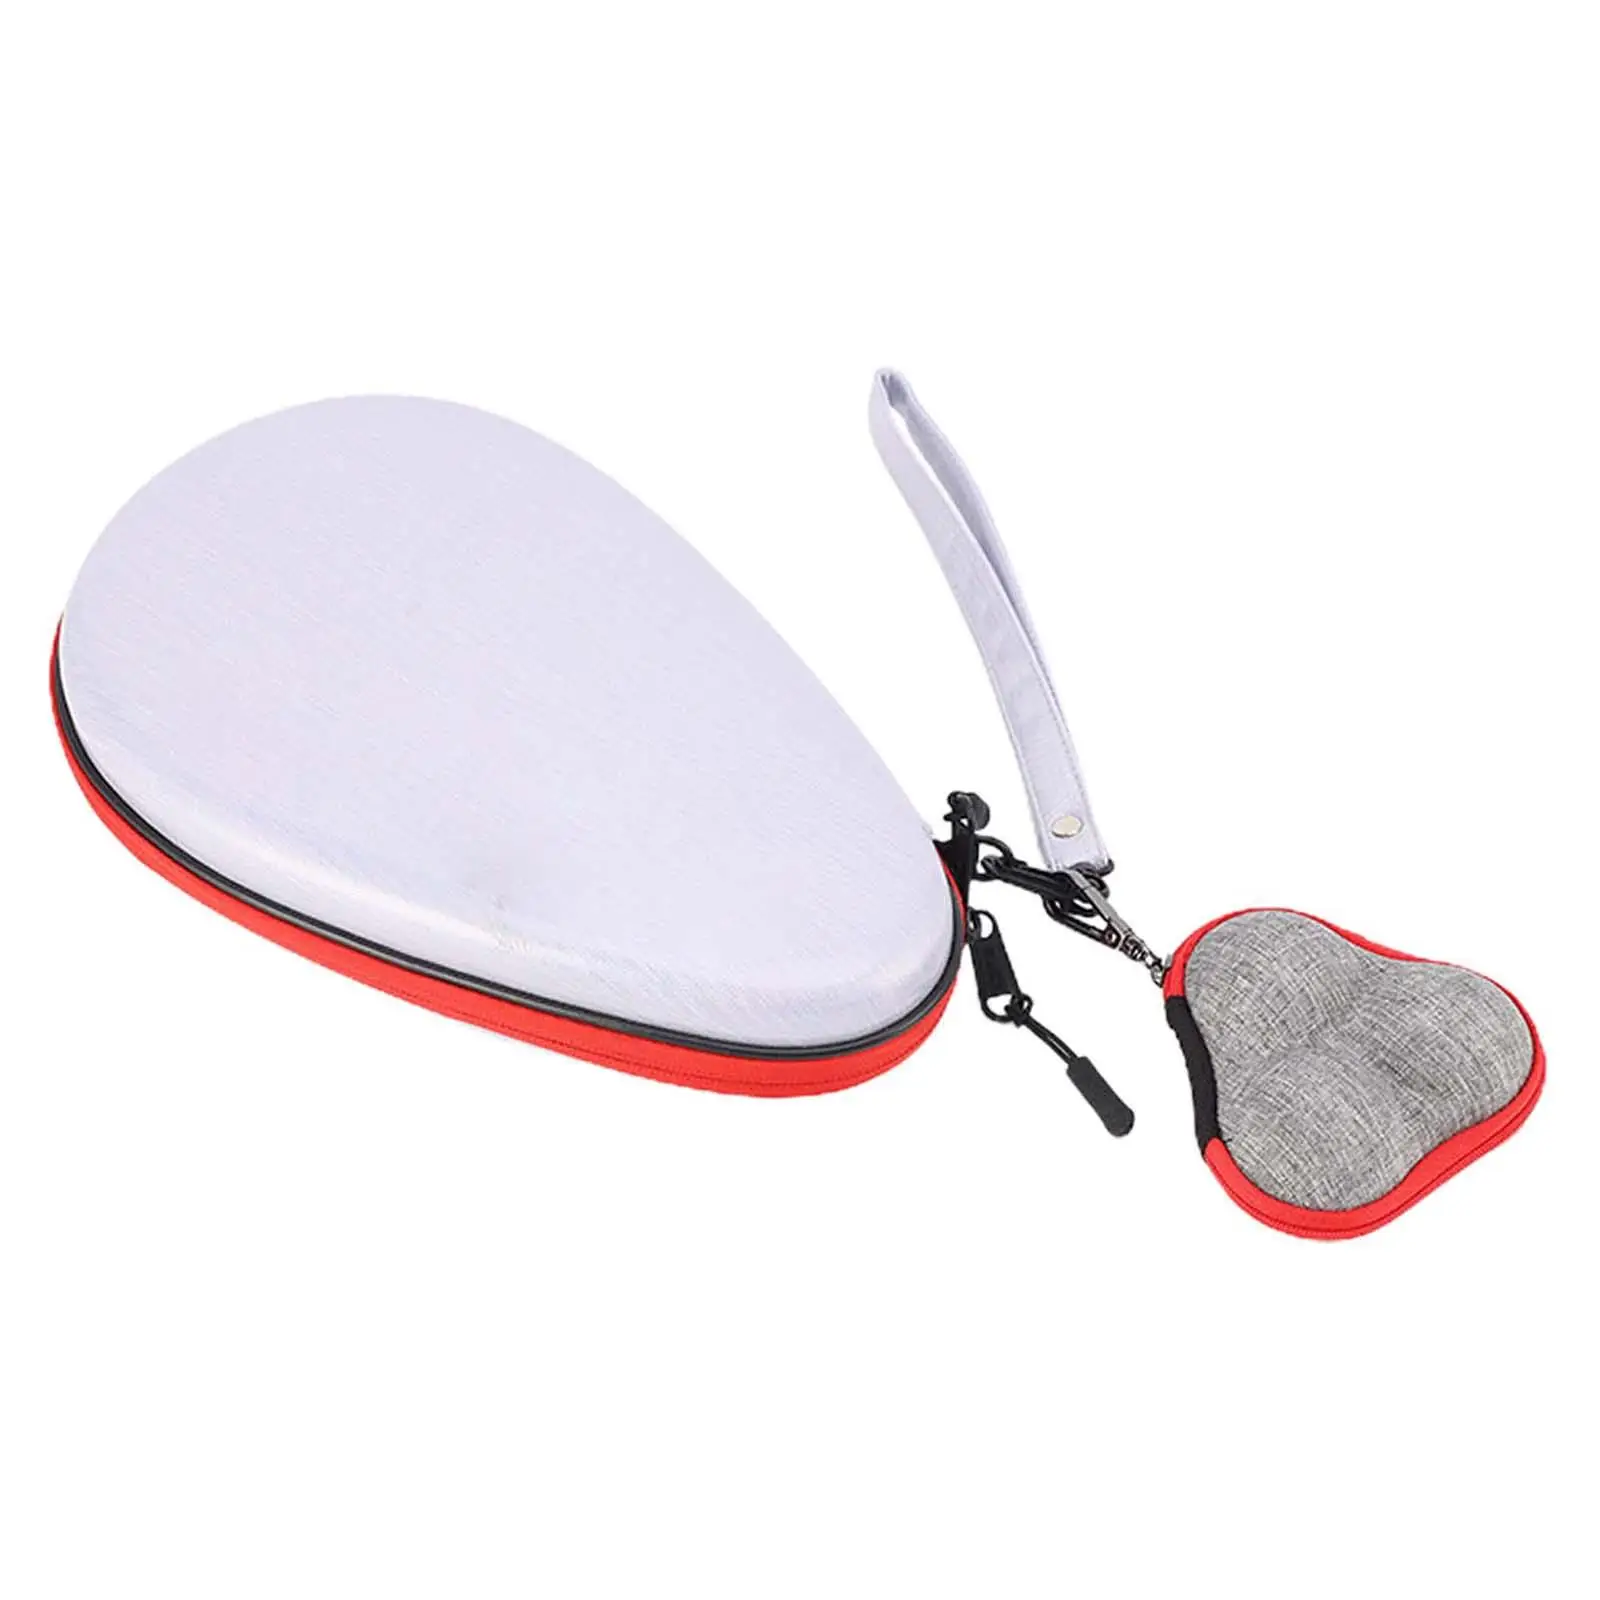 Pingpong Case Wear Resistant with Zipper Container Shock Resistant EVA Table Tennis Racket for Sportsman Unisex Adult Home